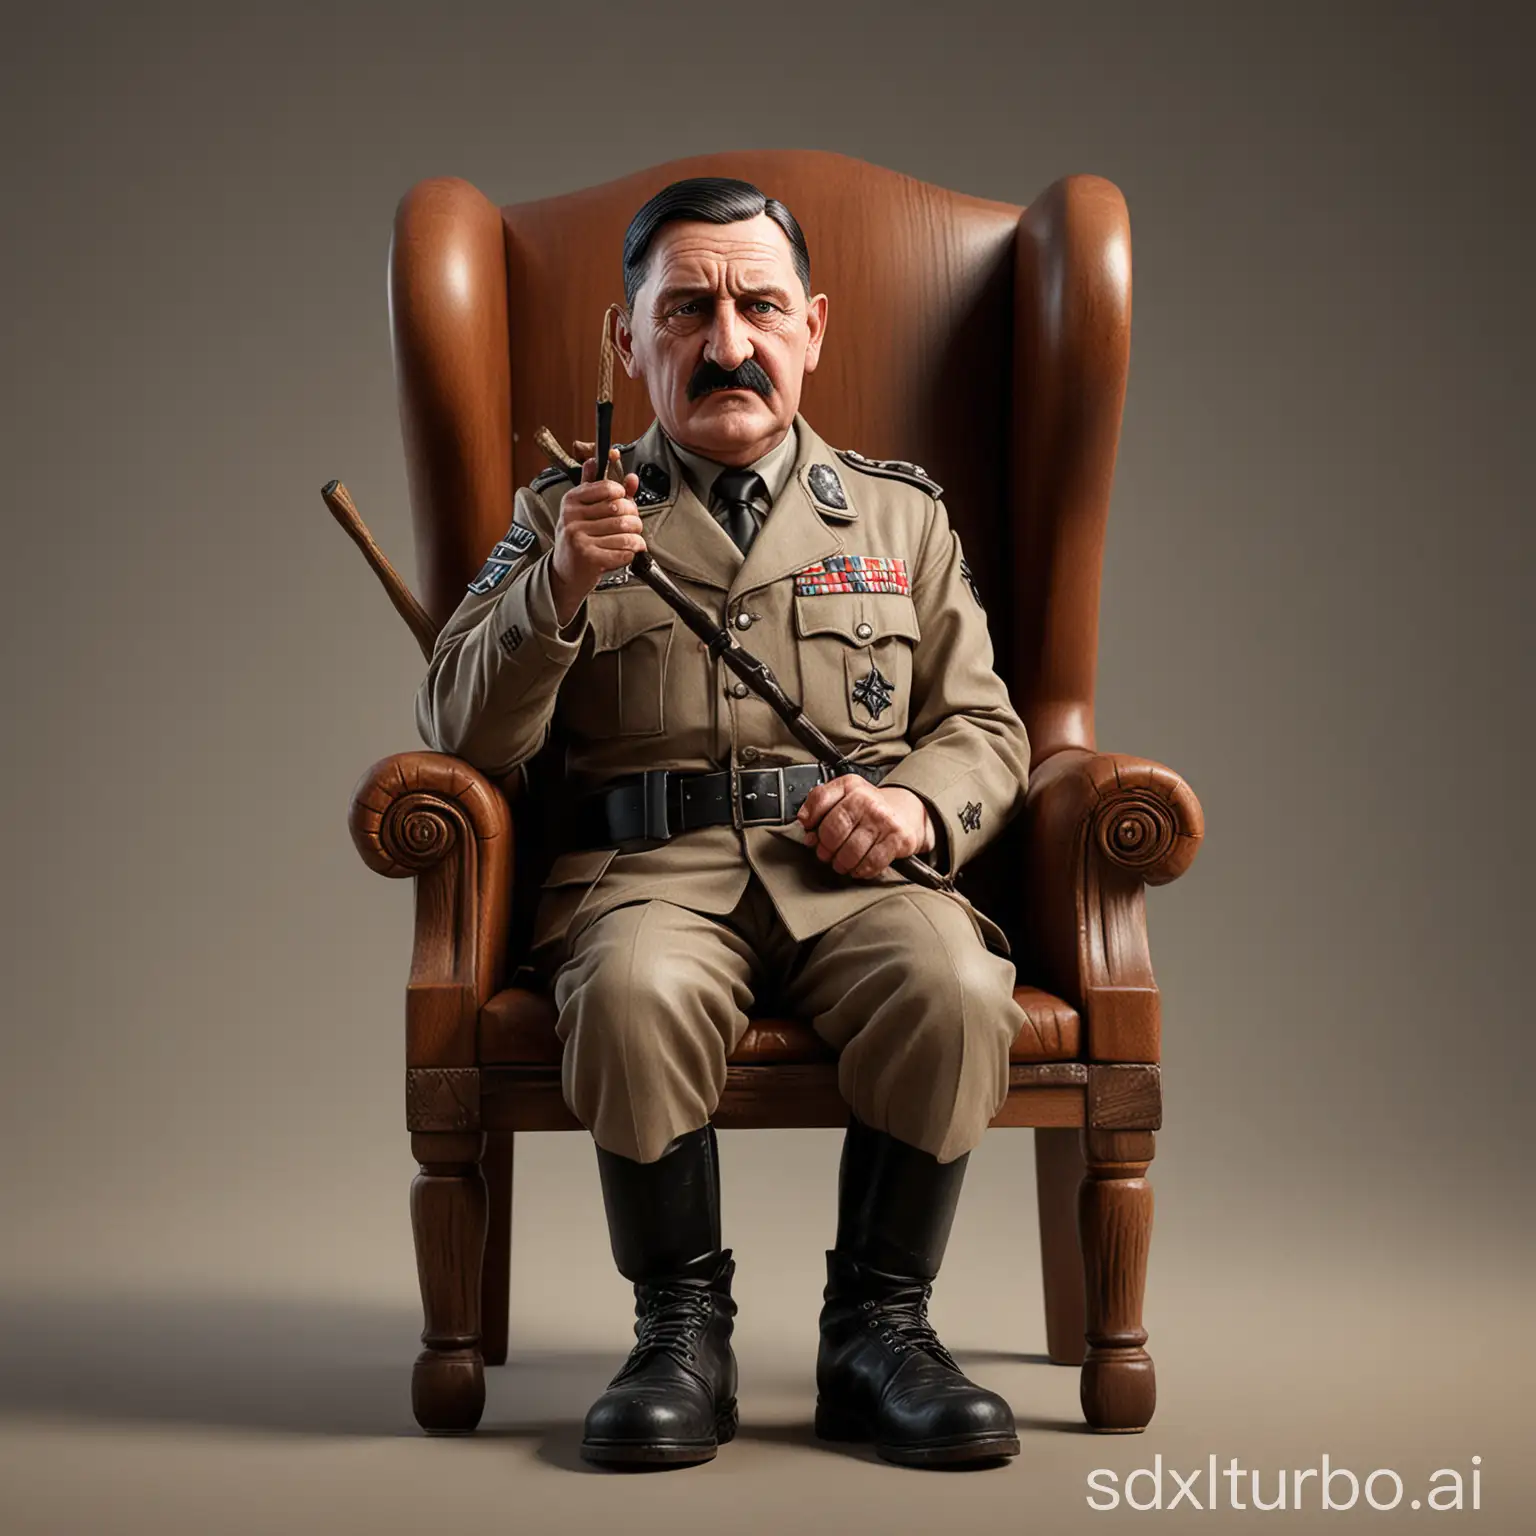 60YearOld-Adolf-Hitler-Relaxing-in-Classic-Wooden-Chair-Dramatic-Portrait-with-German-Military-Uniform